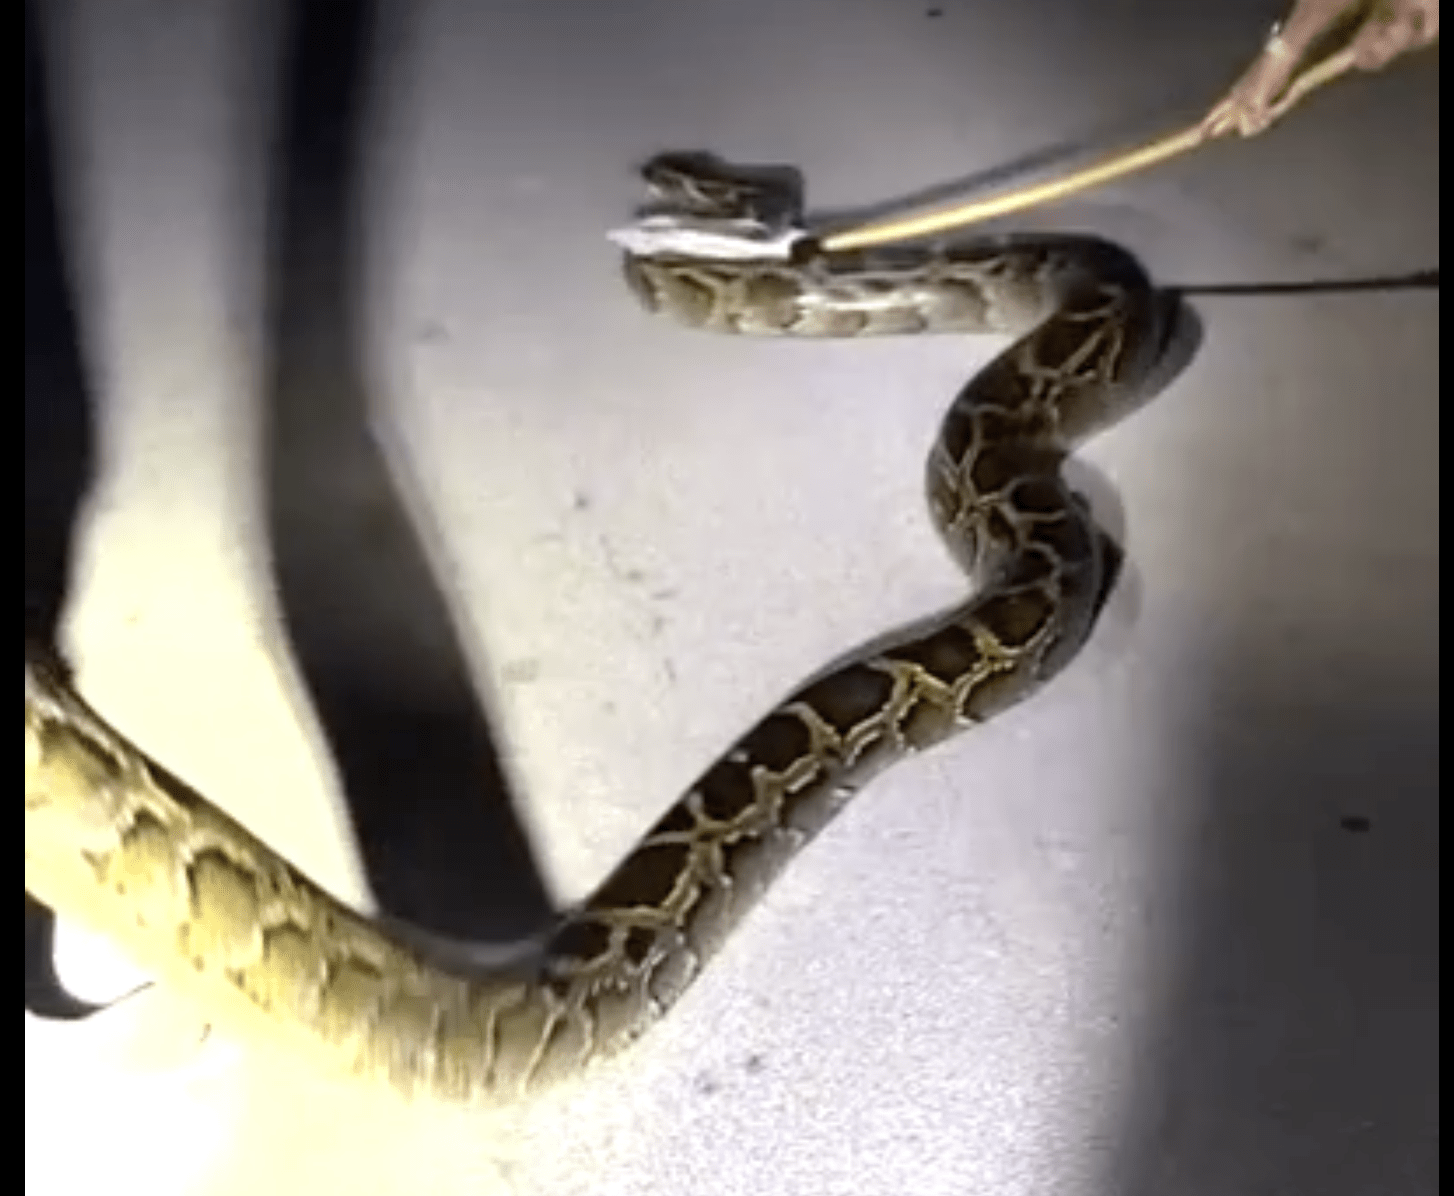 Python hunters wrestle with giant snake, the longest python ever caught in Florida